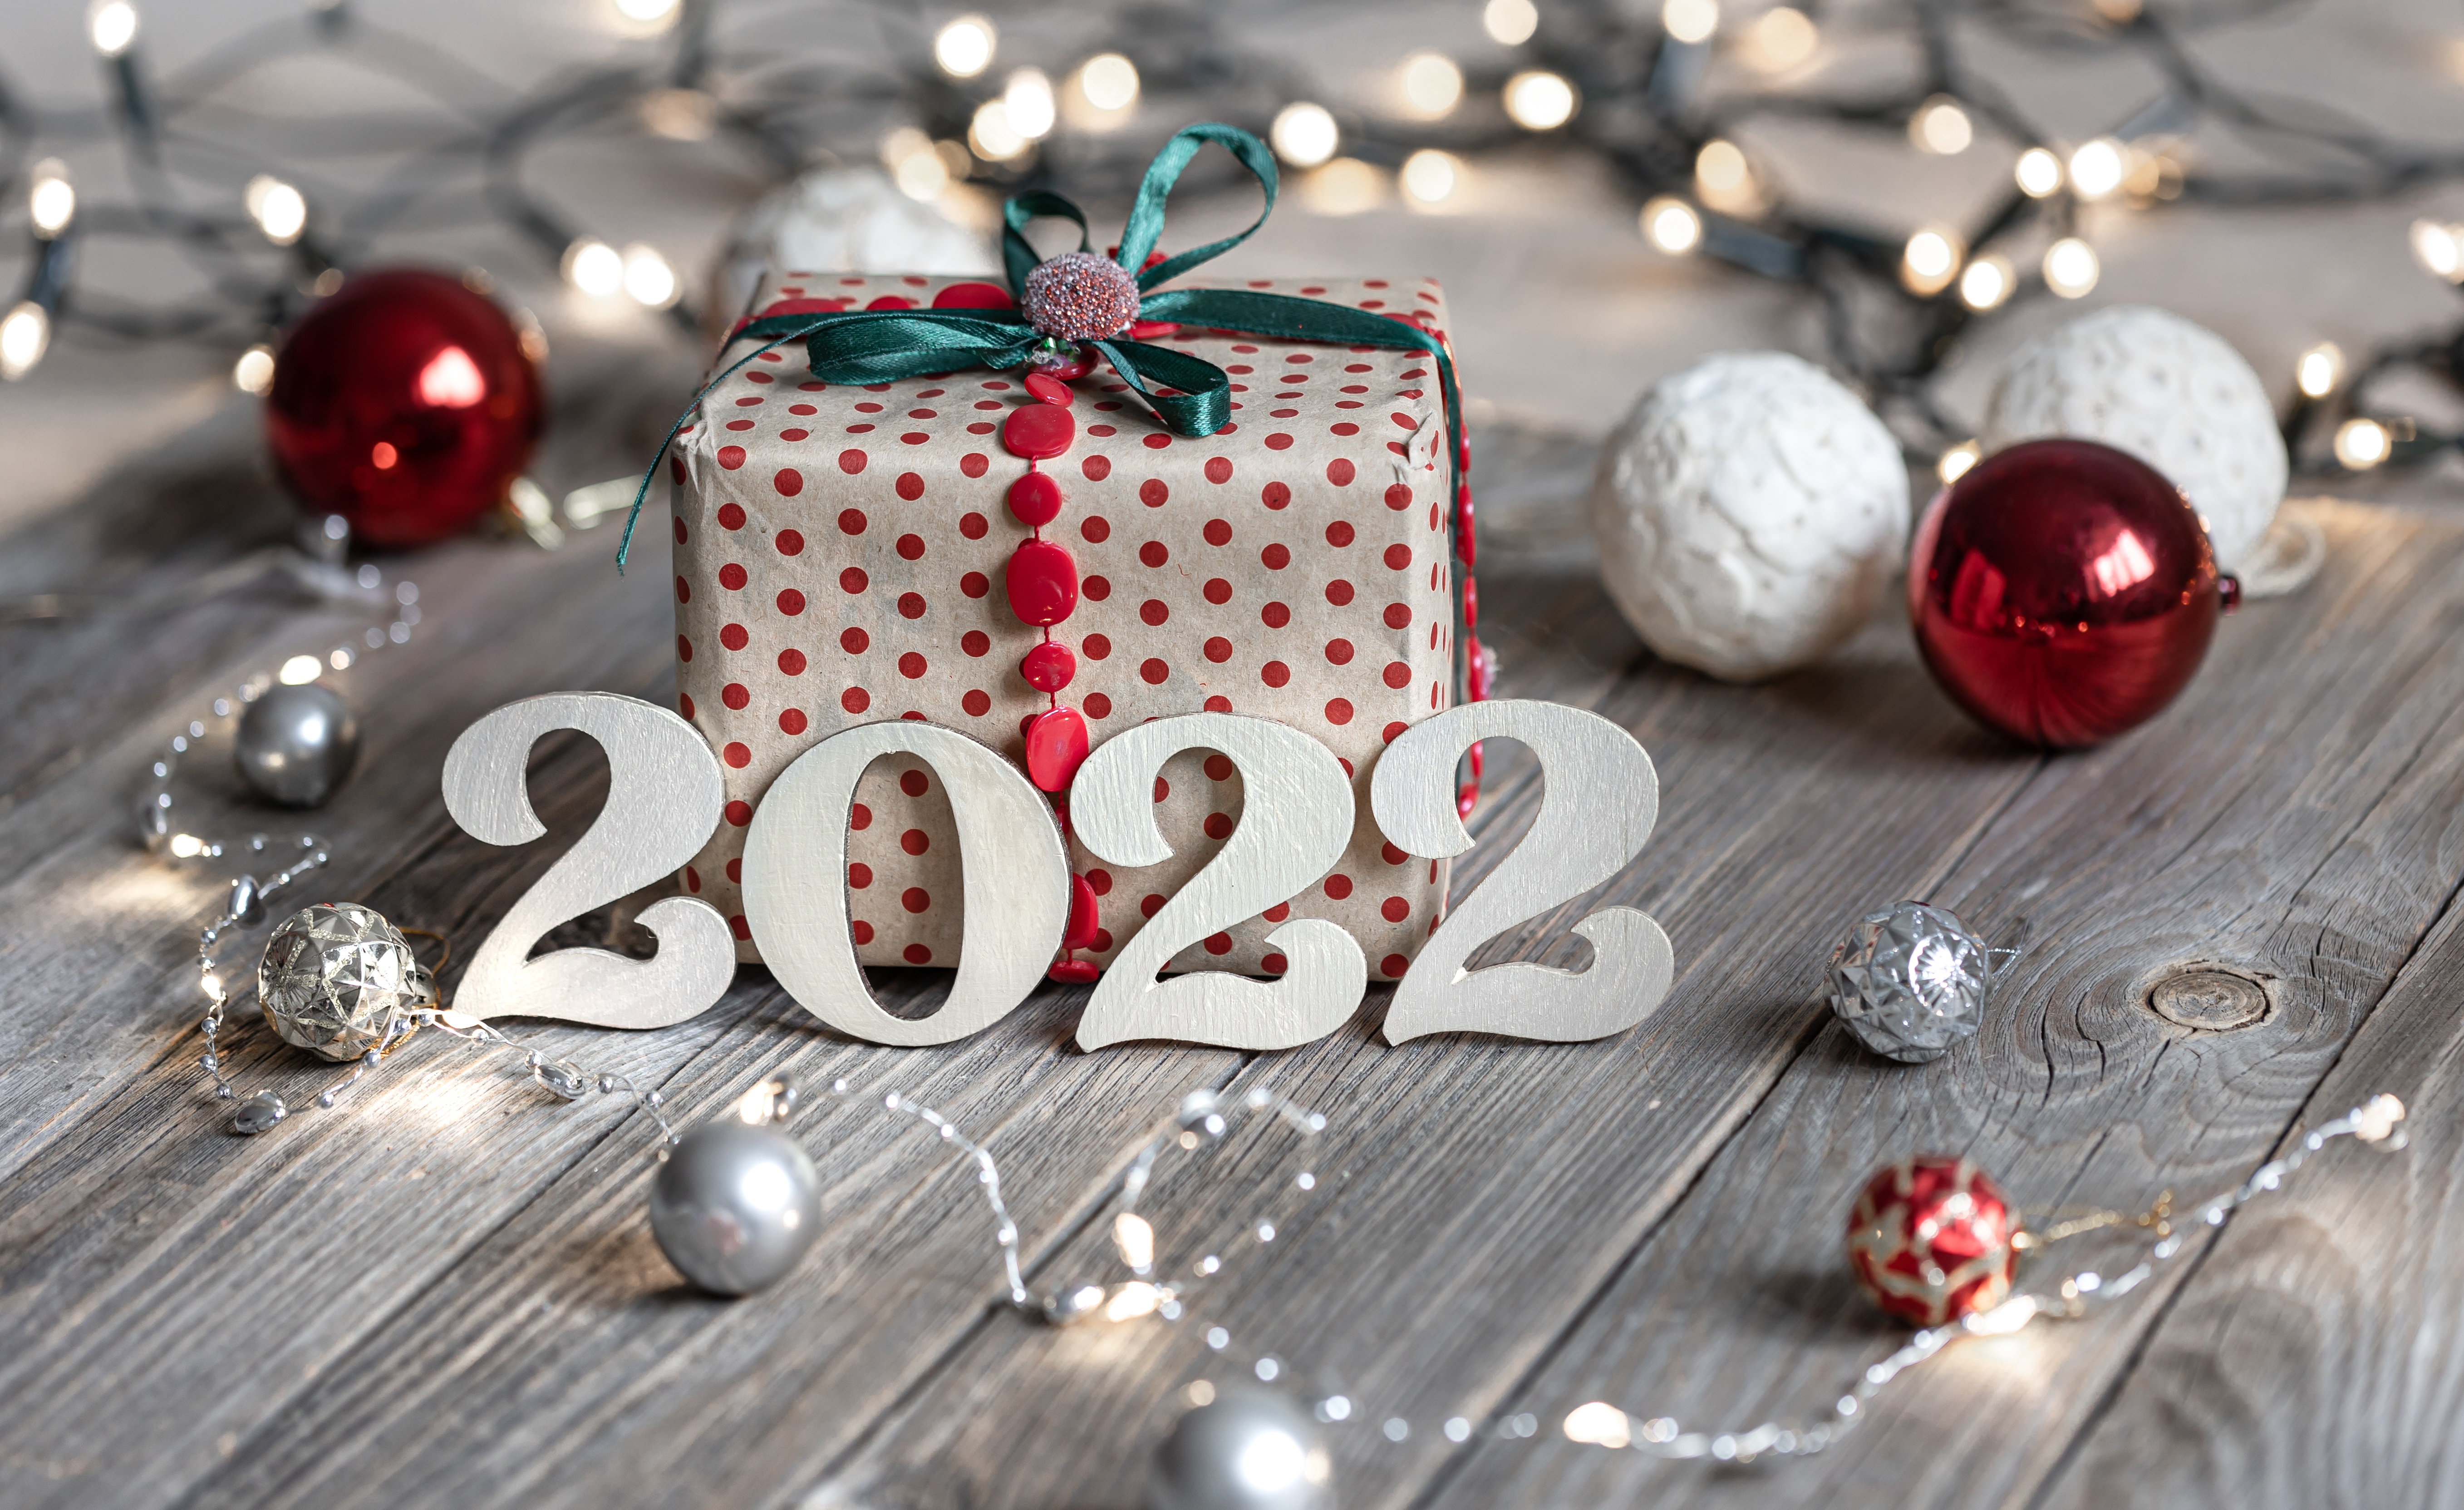 Holiday New Year 2022 HD Wallpaper | Background Image